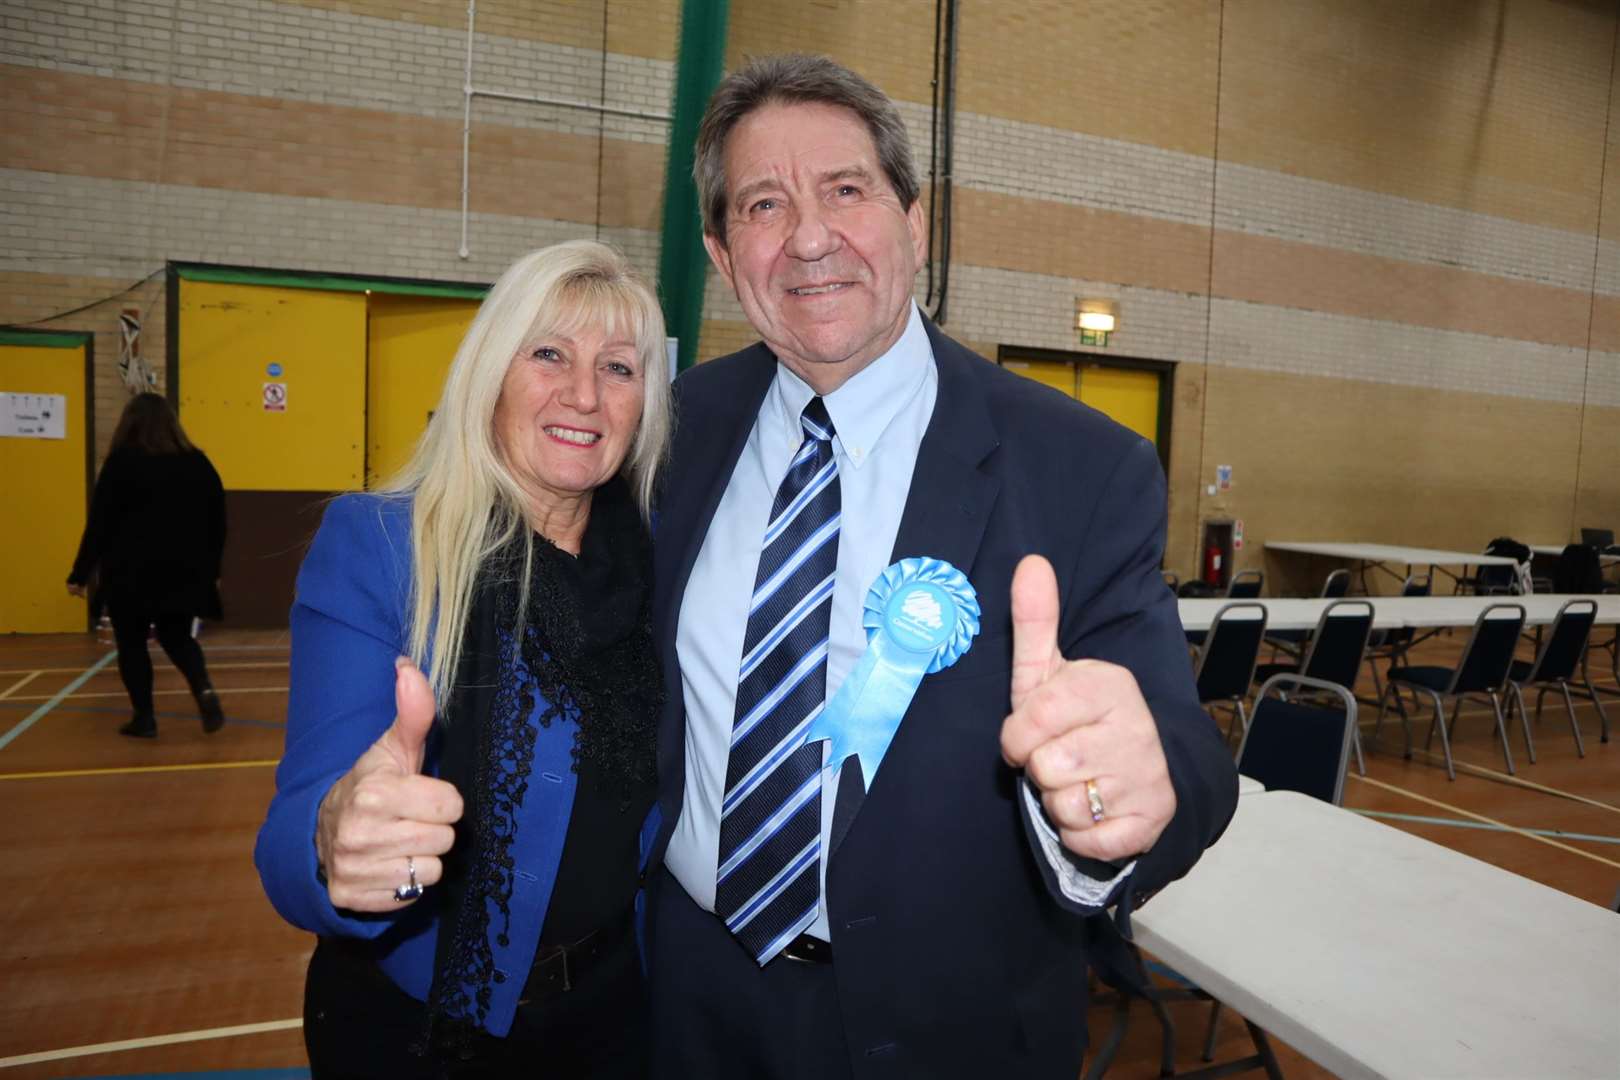 Thumbs up for victory: Conservative Gordon Henderson and his wife Louise at the Sittingbourne and Sheppey general election count (24151129)